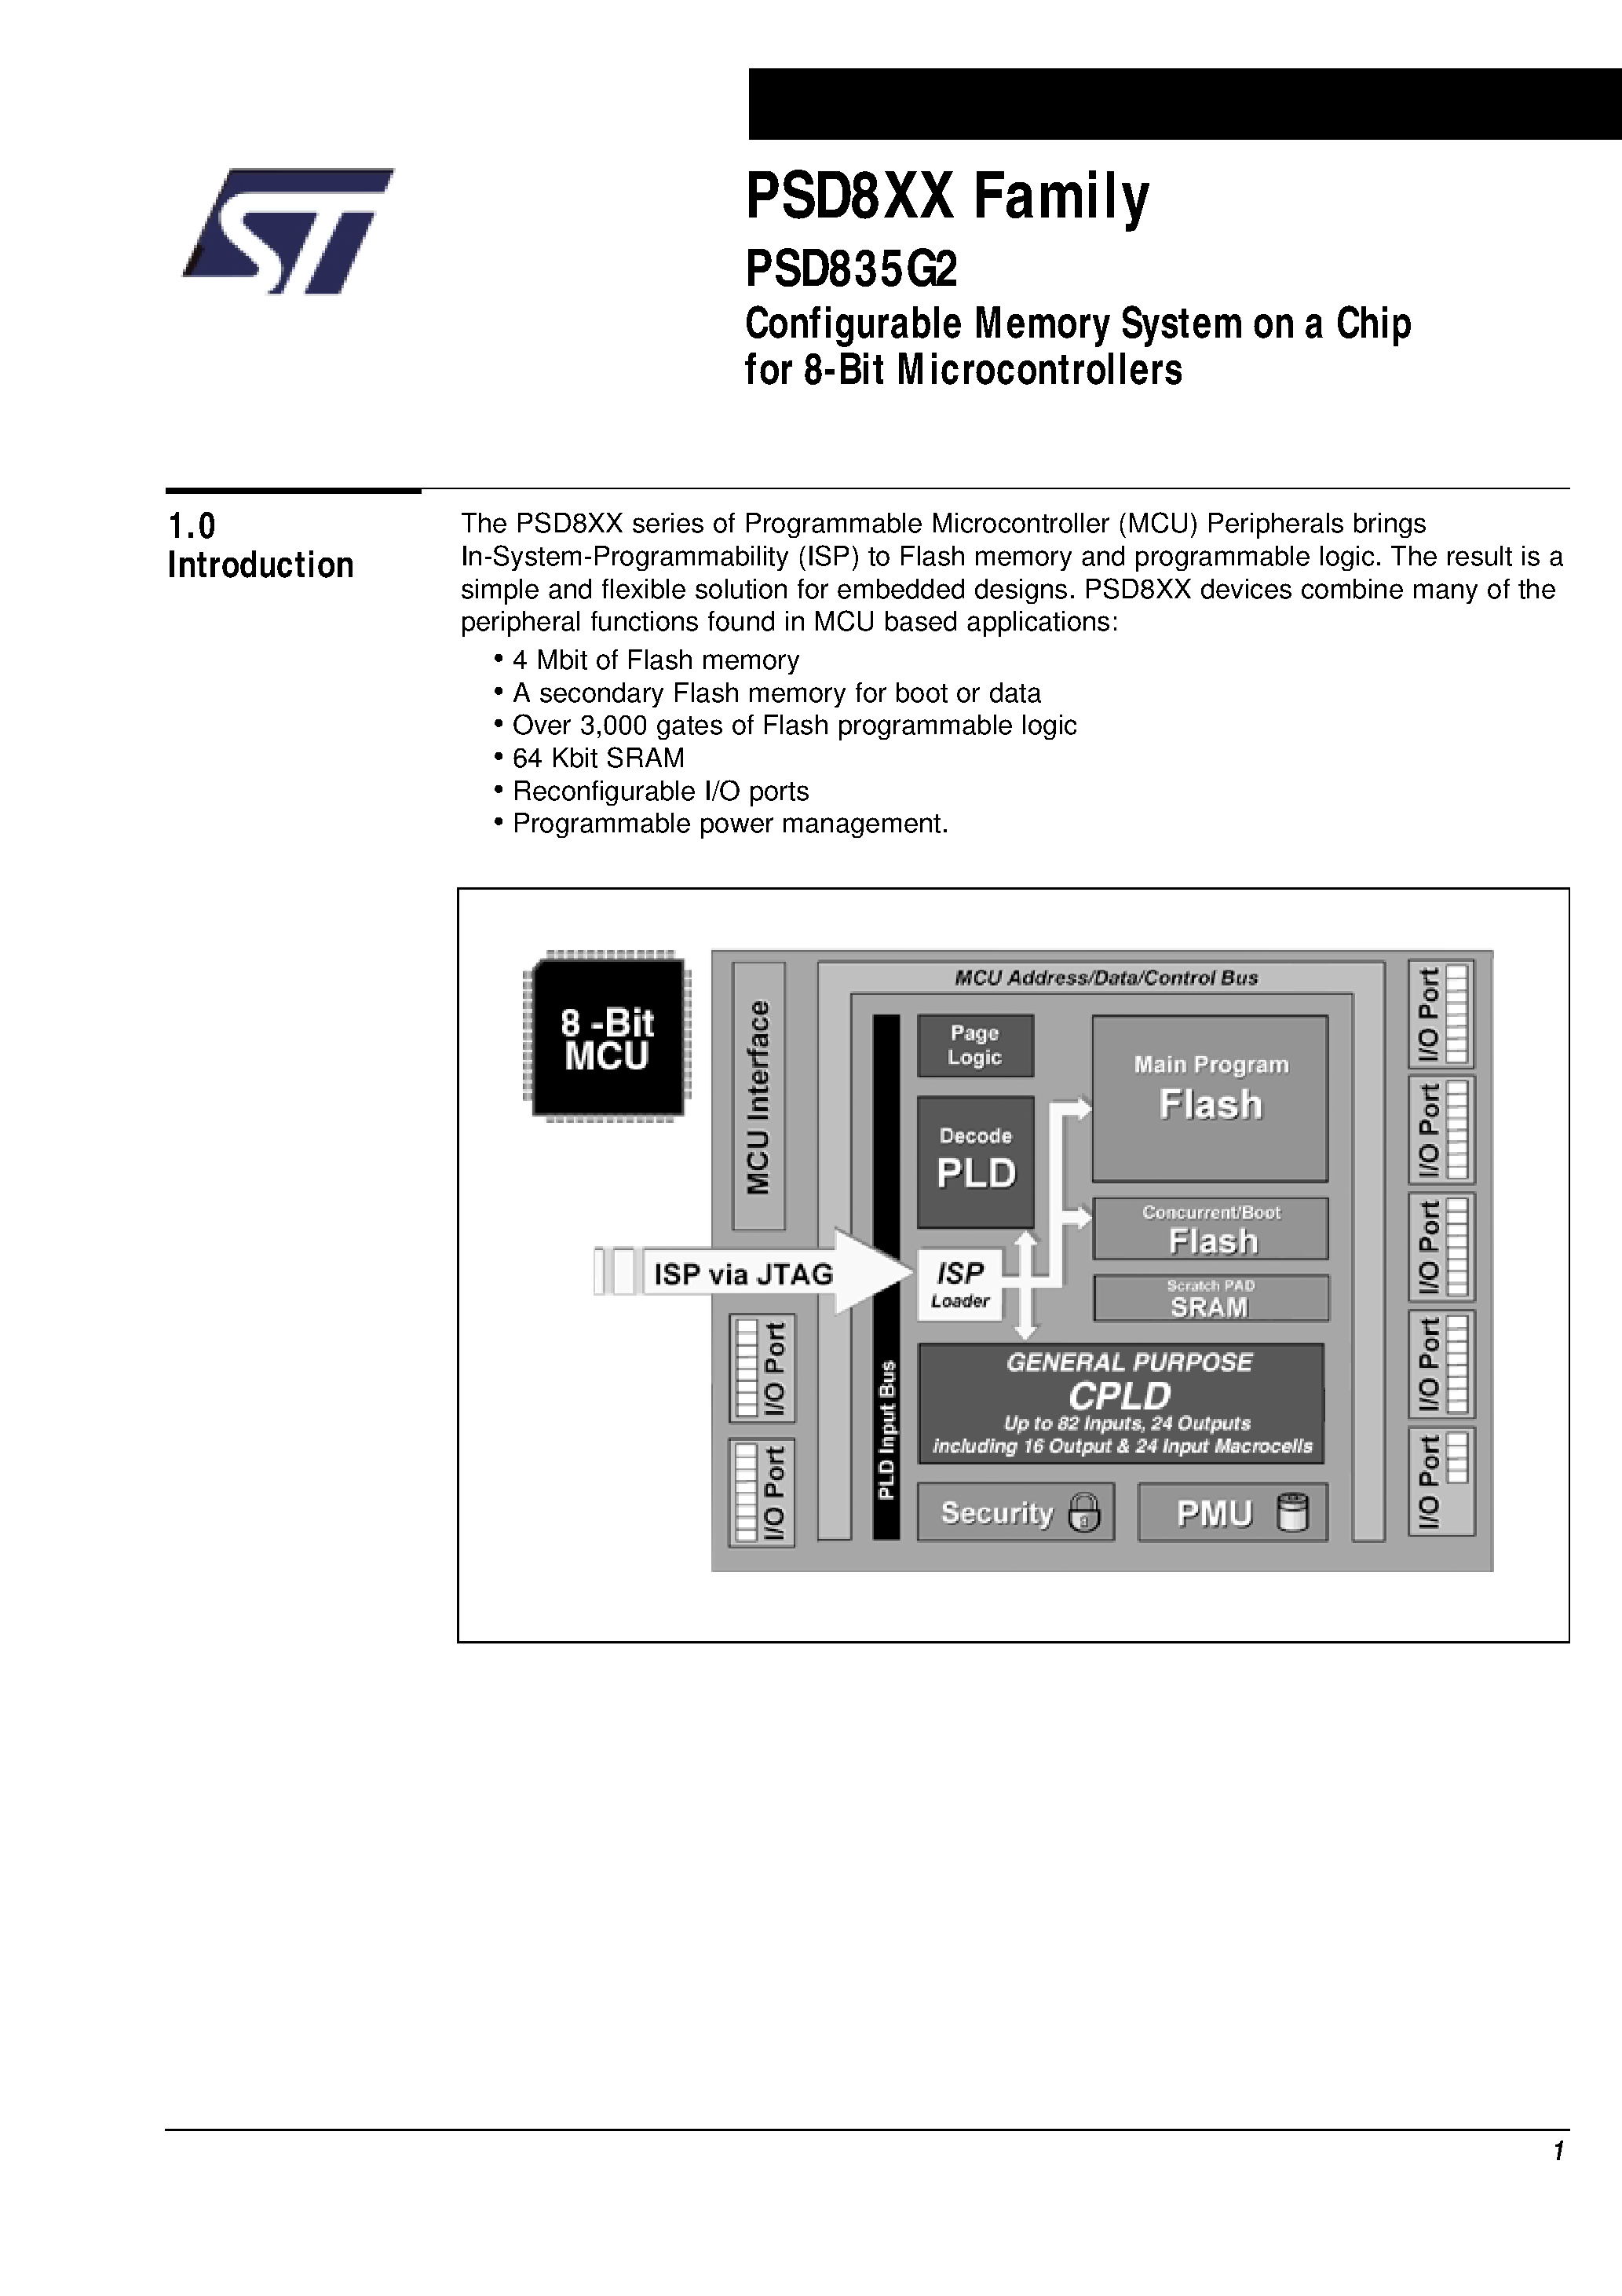 Datasheet PSD835F2-A-20B81I - Configurable Memory System on a Chip for 8-Bit Microcontrollers page 2